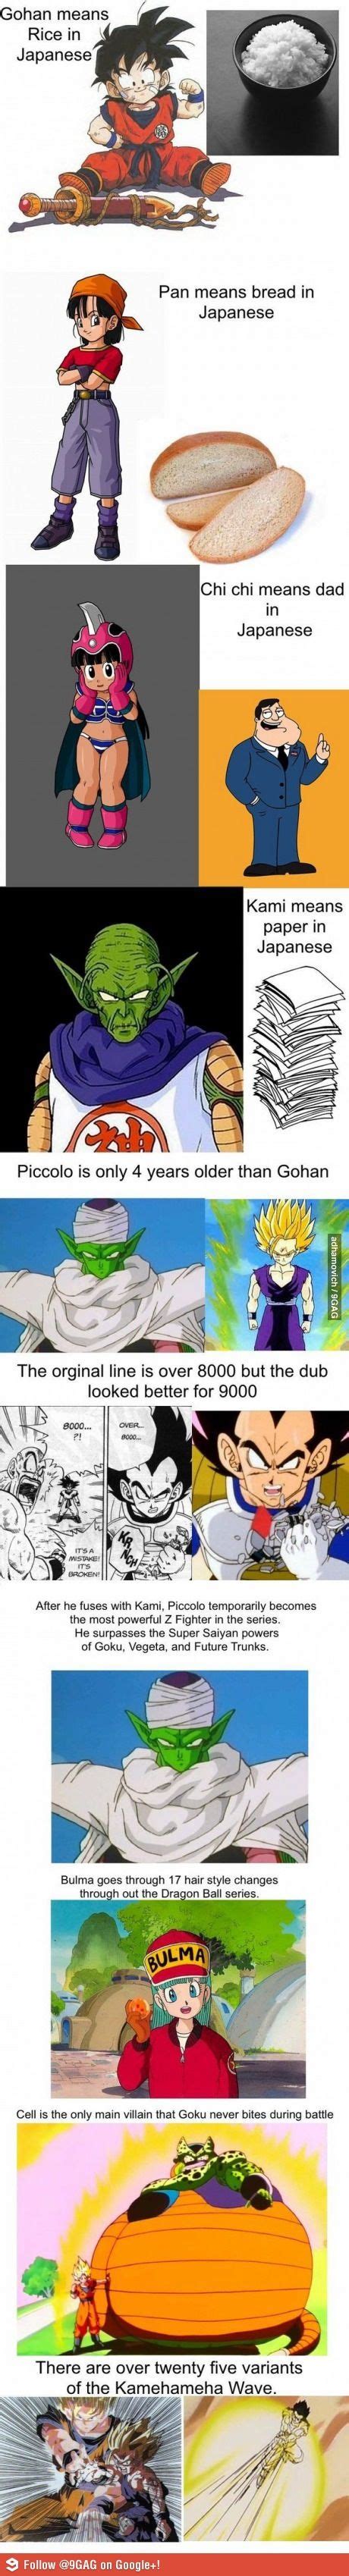 Goku's death to cell was supposed to be permanent and gohan was the replacement, however plans changed and unfortunately gohan eventually receded back into the background. Dragon ball z facts | Fun and Quotes | Pinterest